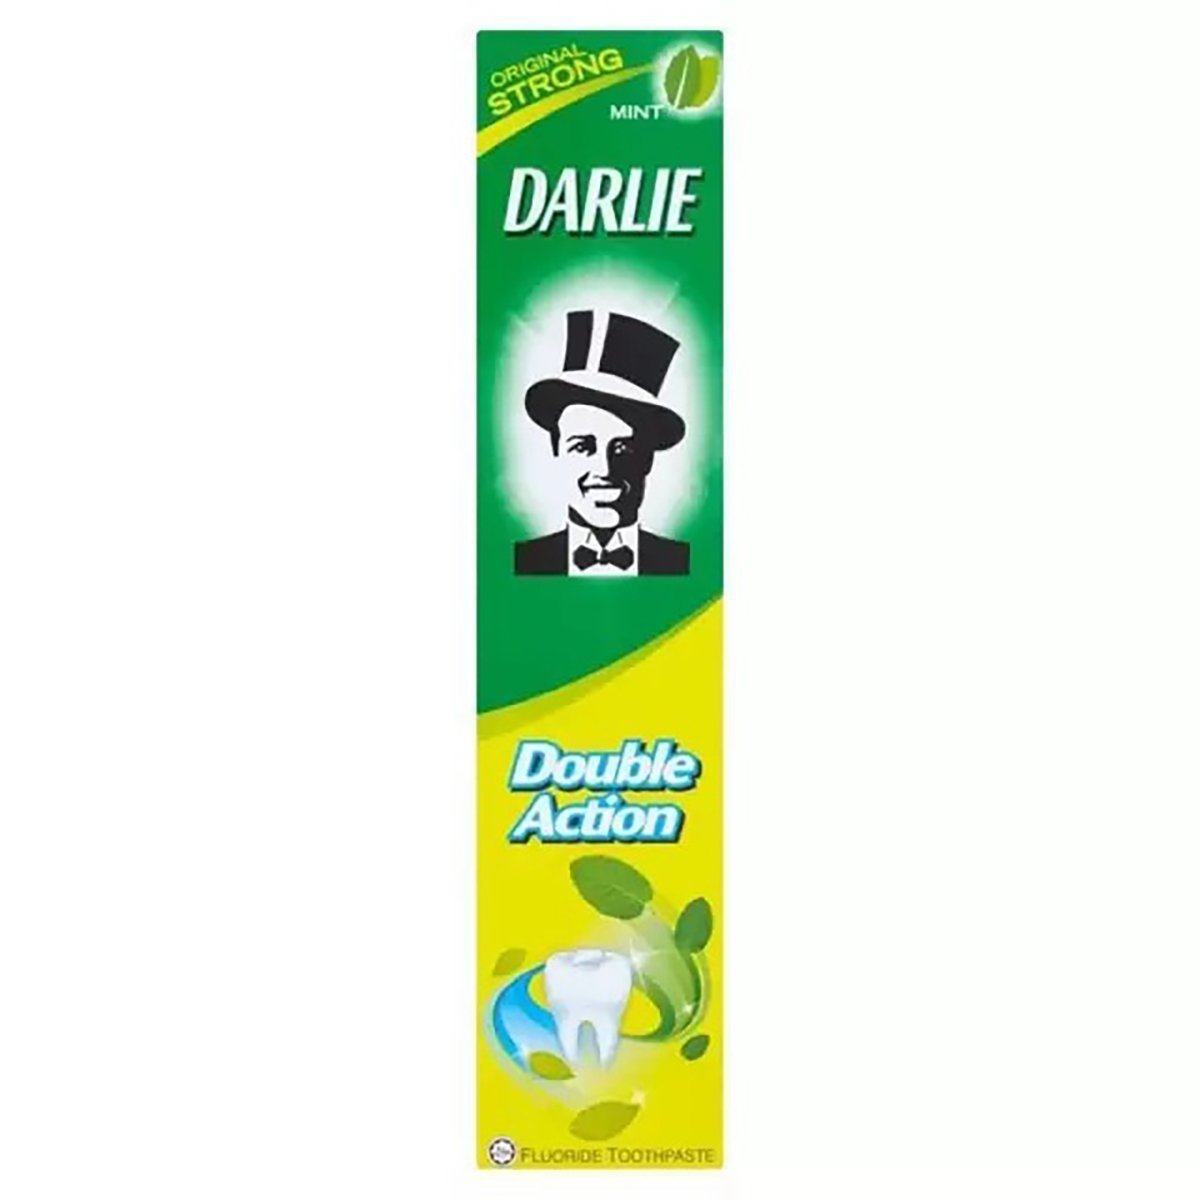 Darlie Toothpaste Double Action 175g